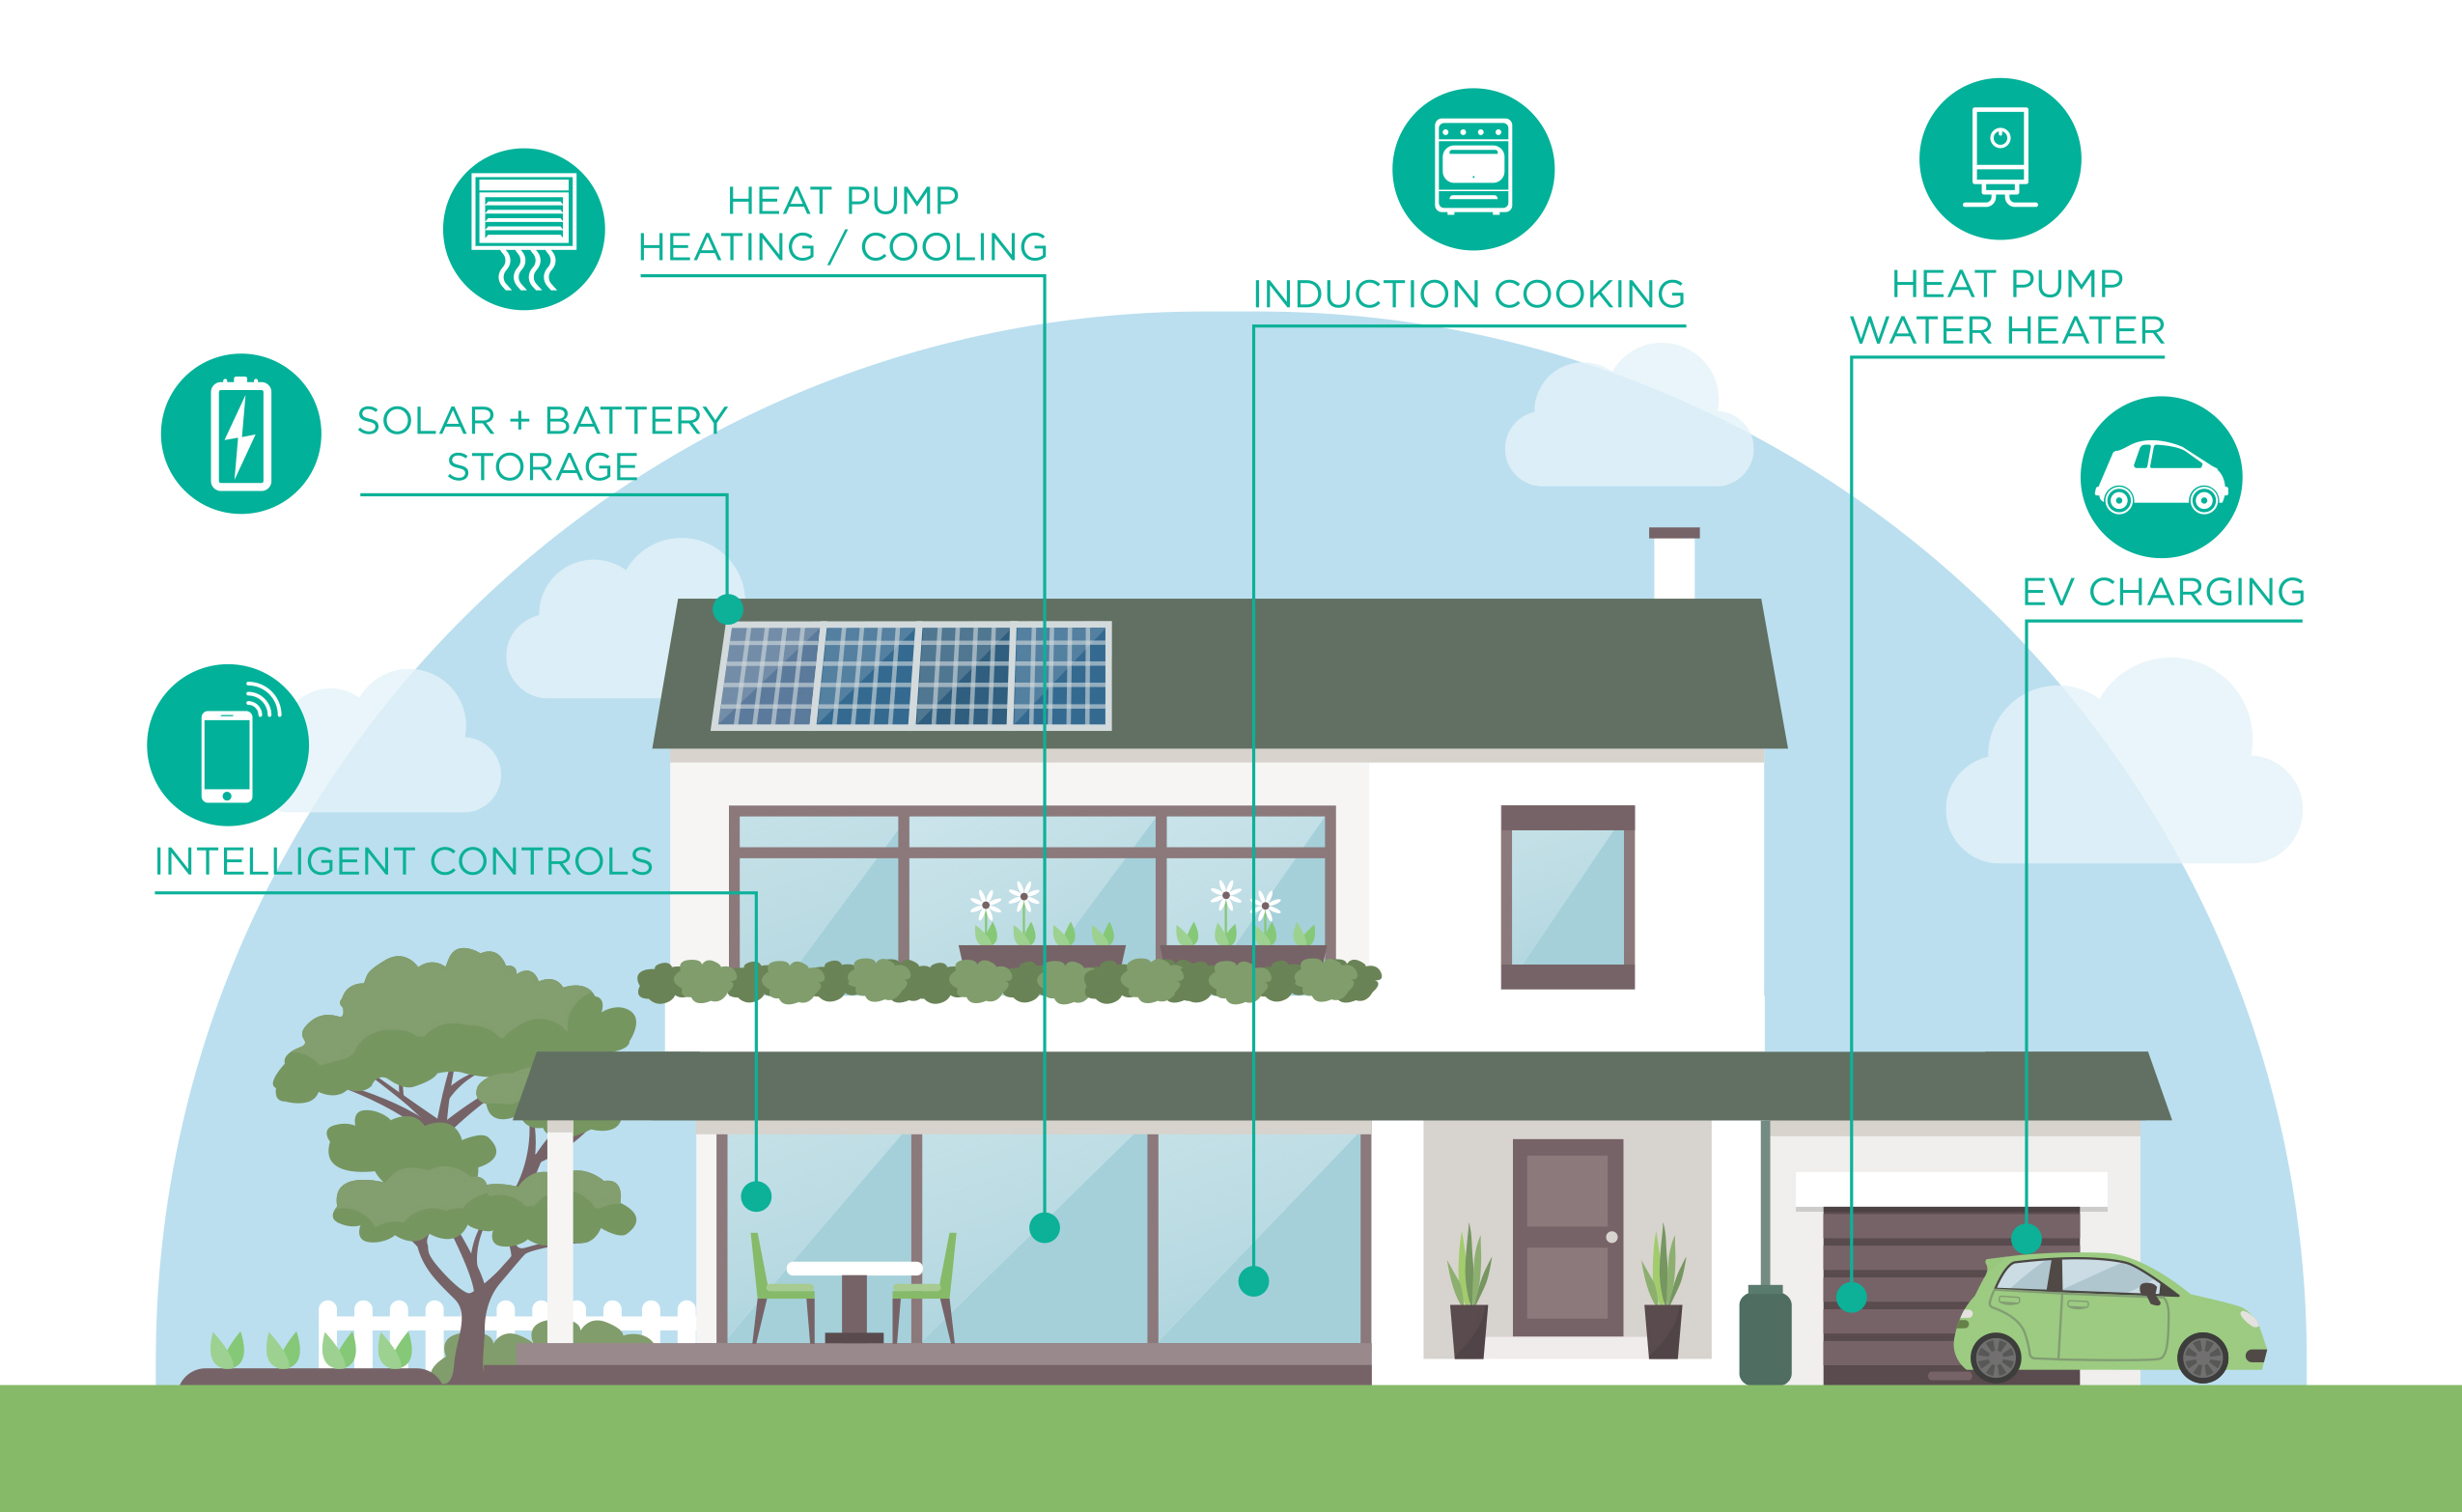 A graphic of a house with intelligent controls, solar + battery storage, heat pump heating / cooling, induction cooking, heat pump water heater, EV Charging